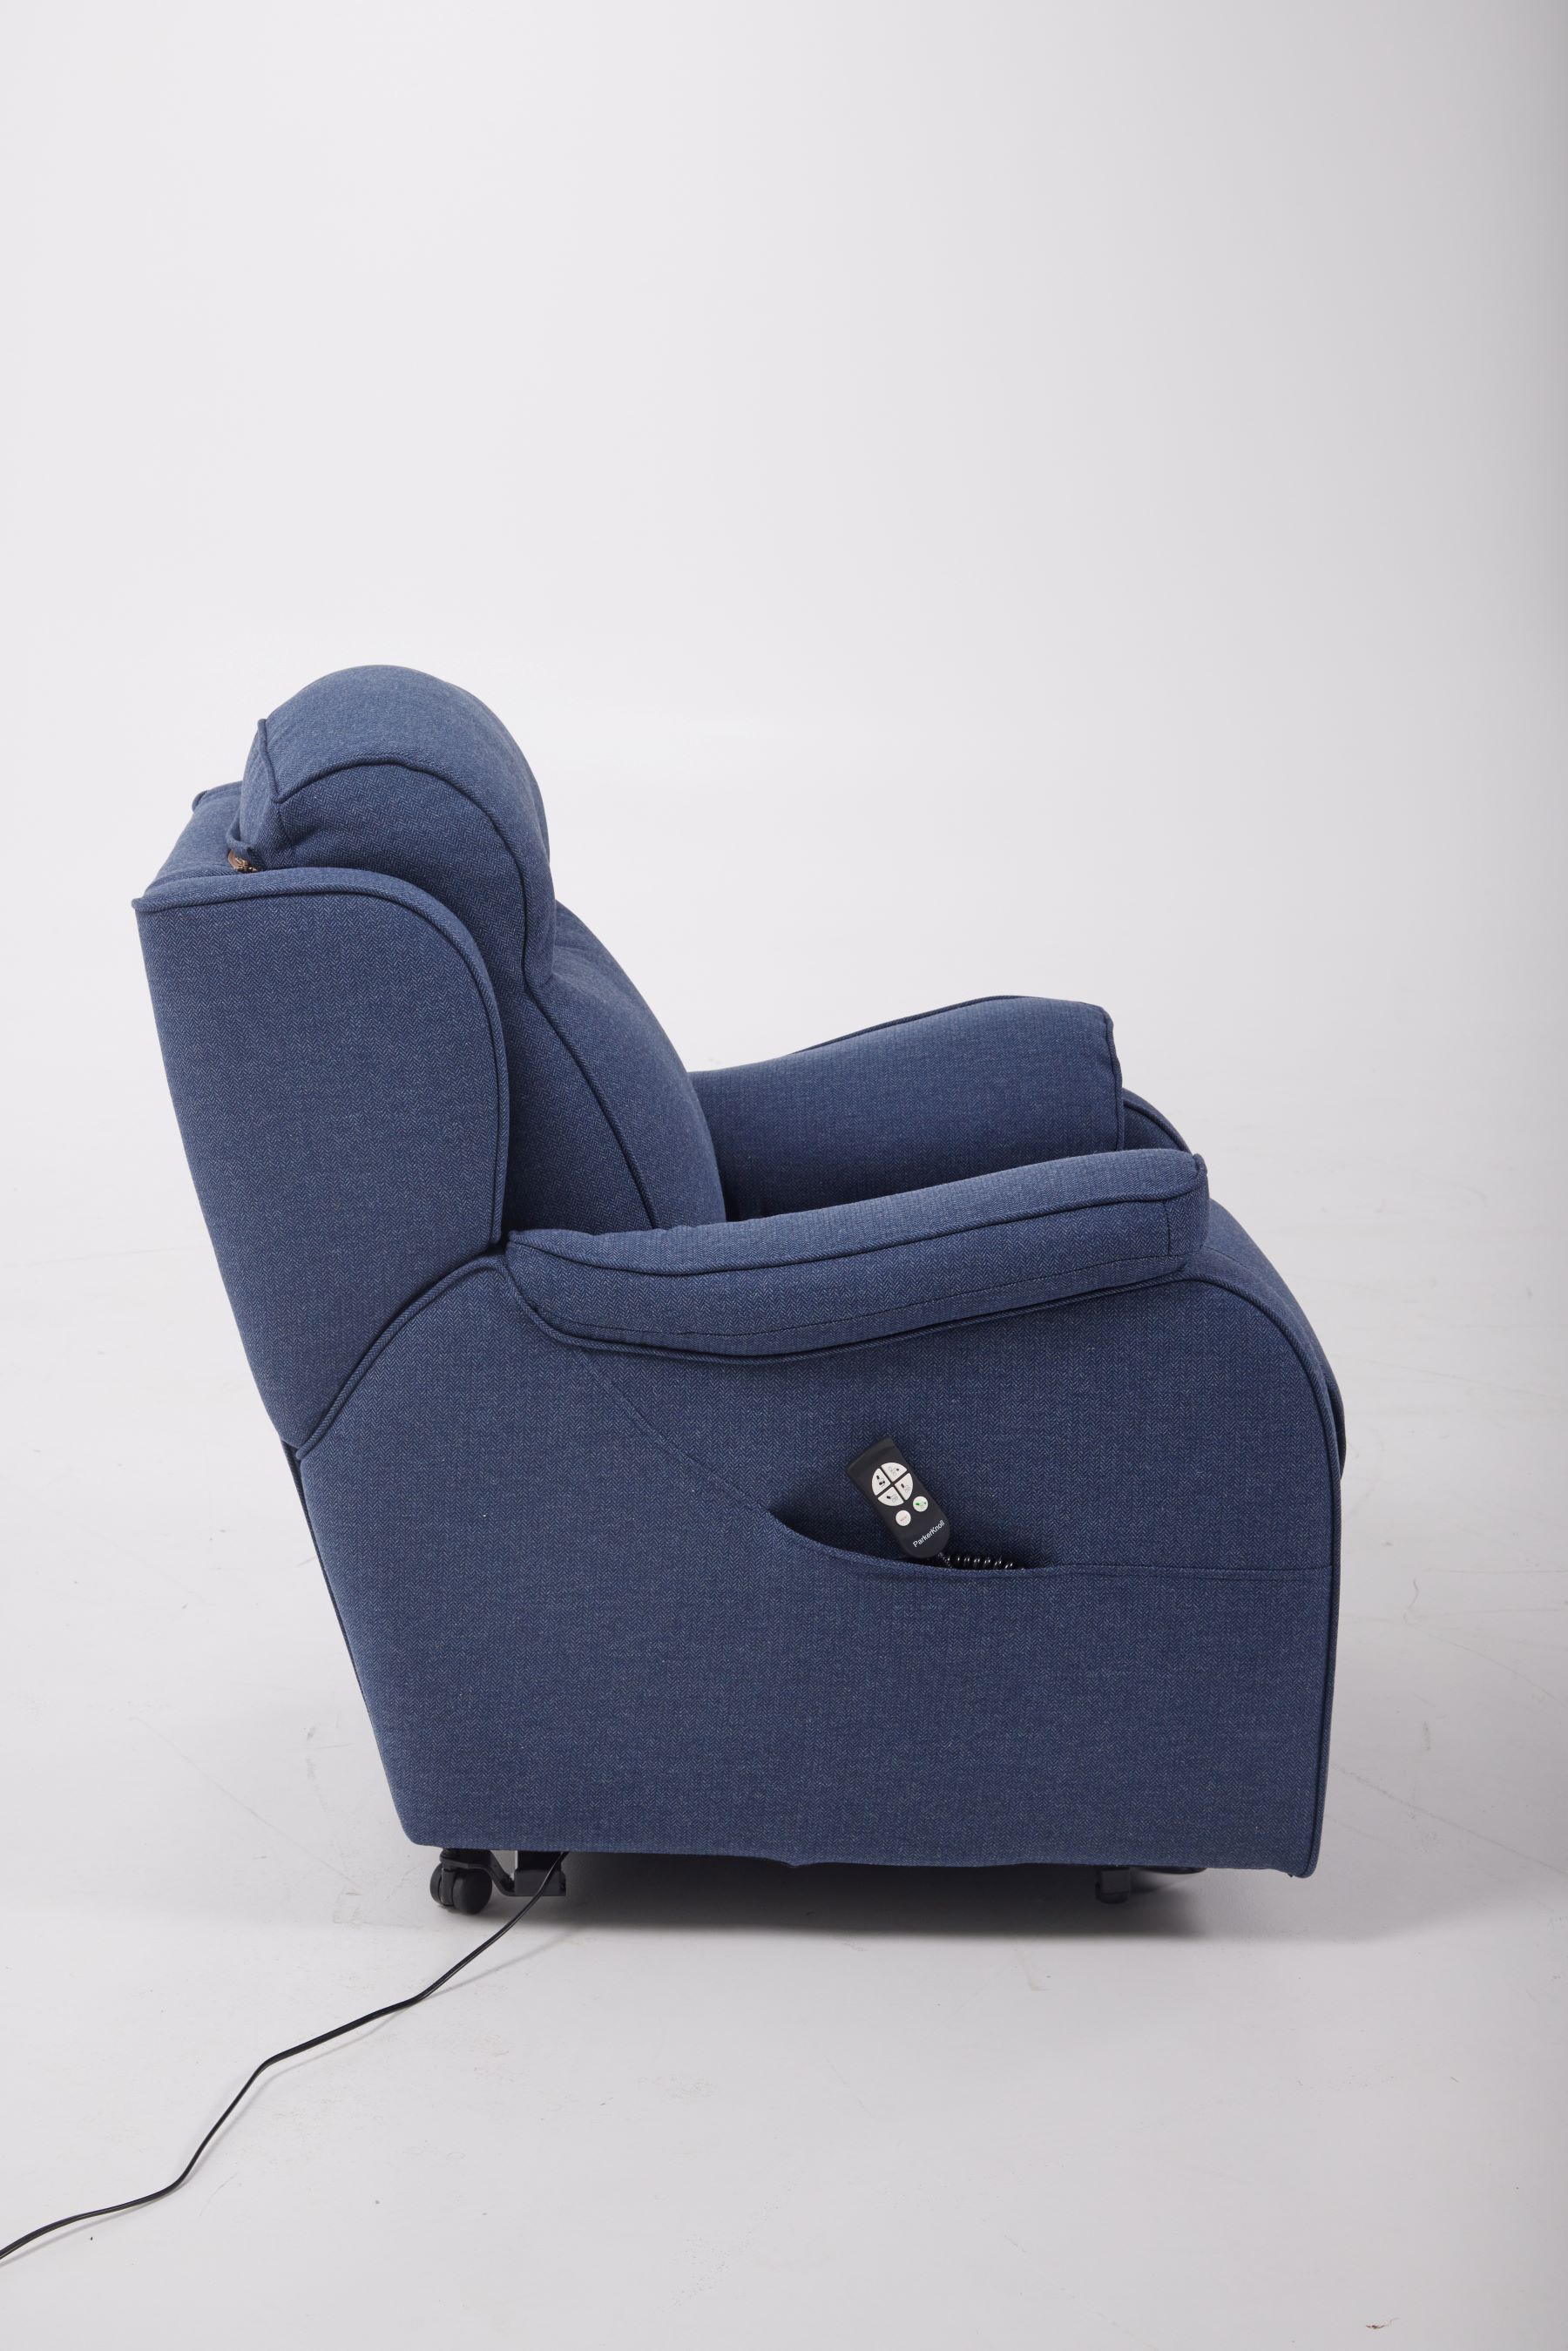 Parker Knoll Boston Rise and Recline Armchair Farland Navy